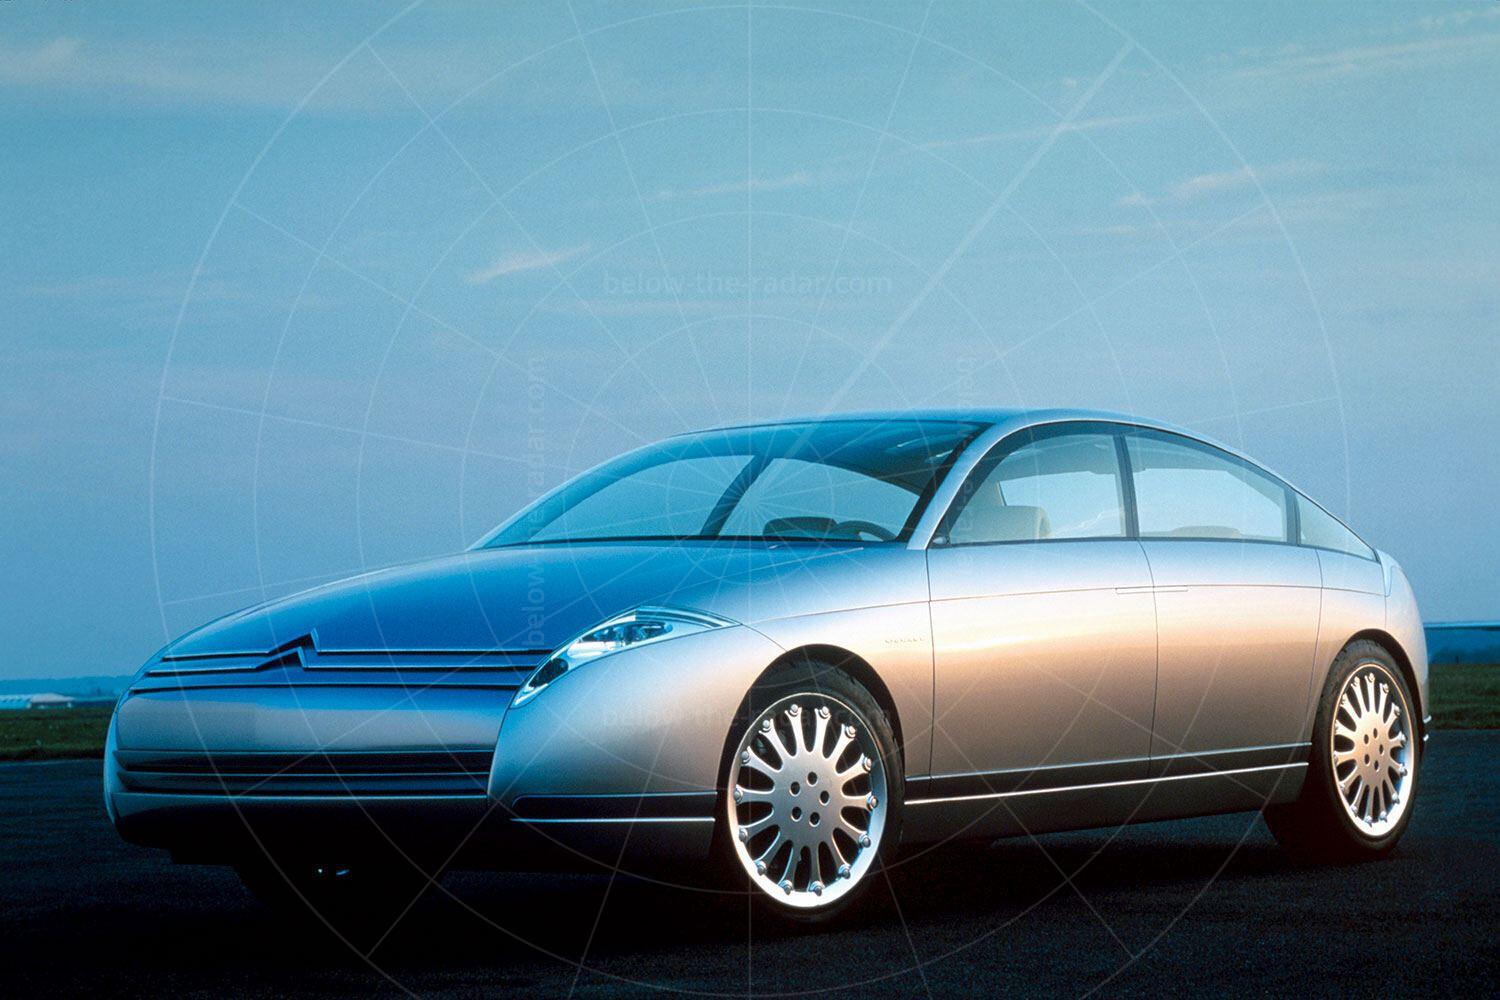 The story of the Citroen C6 Lignage concept car on The Radar